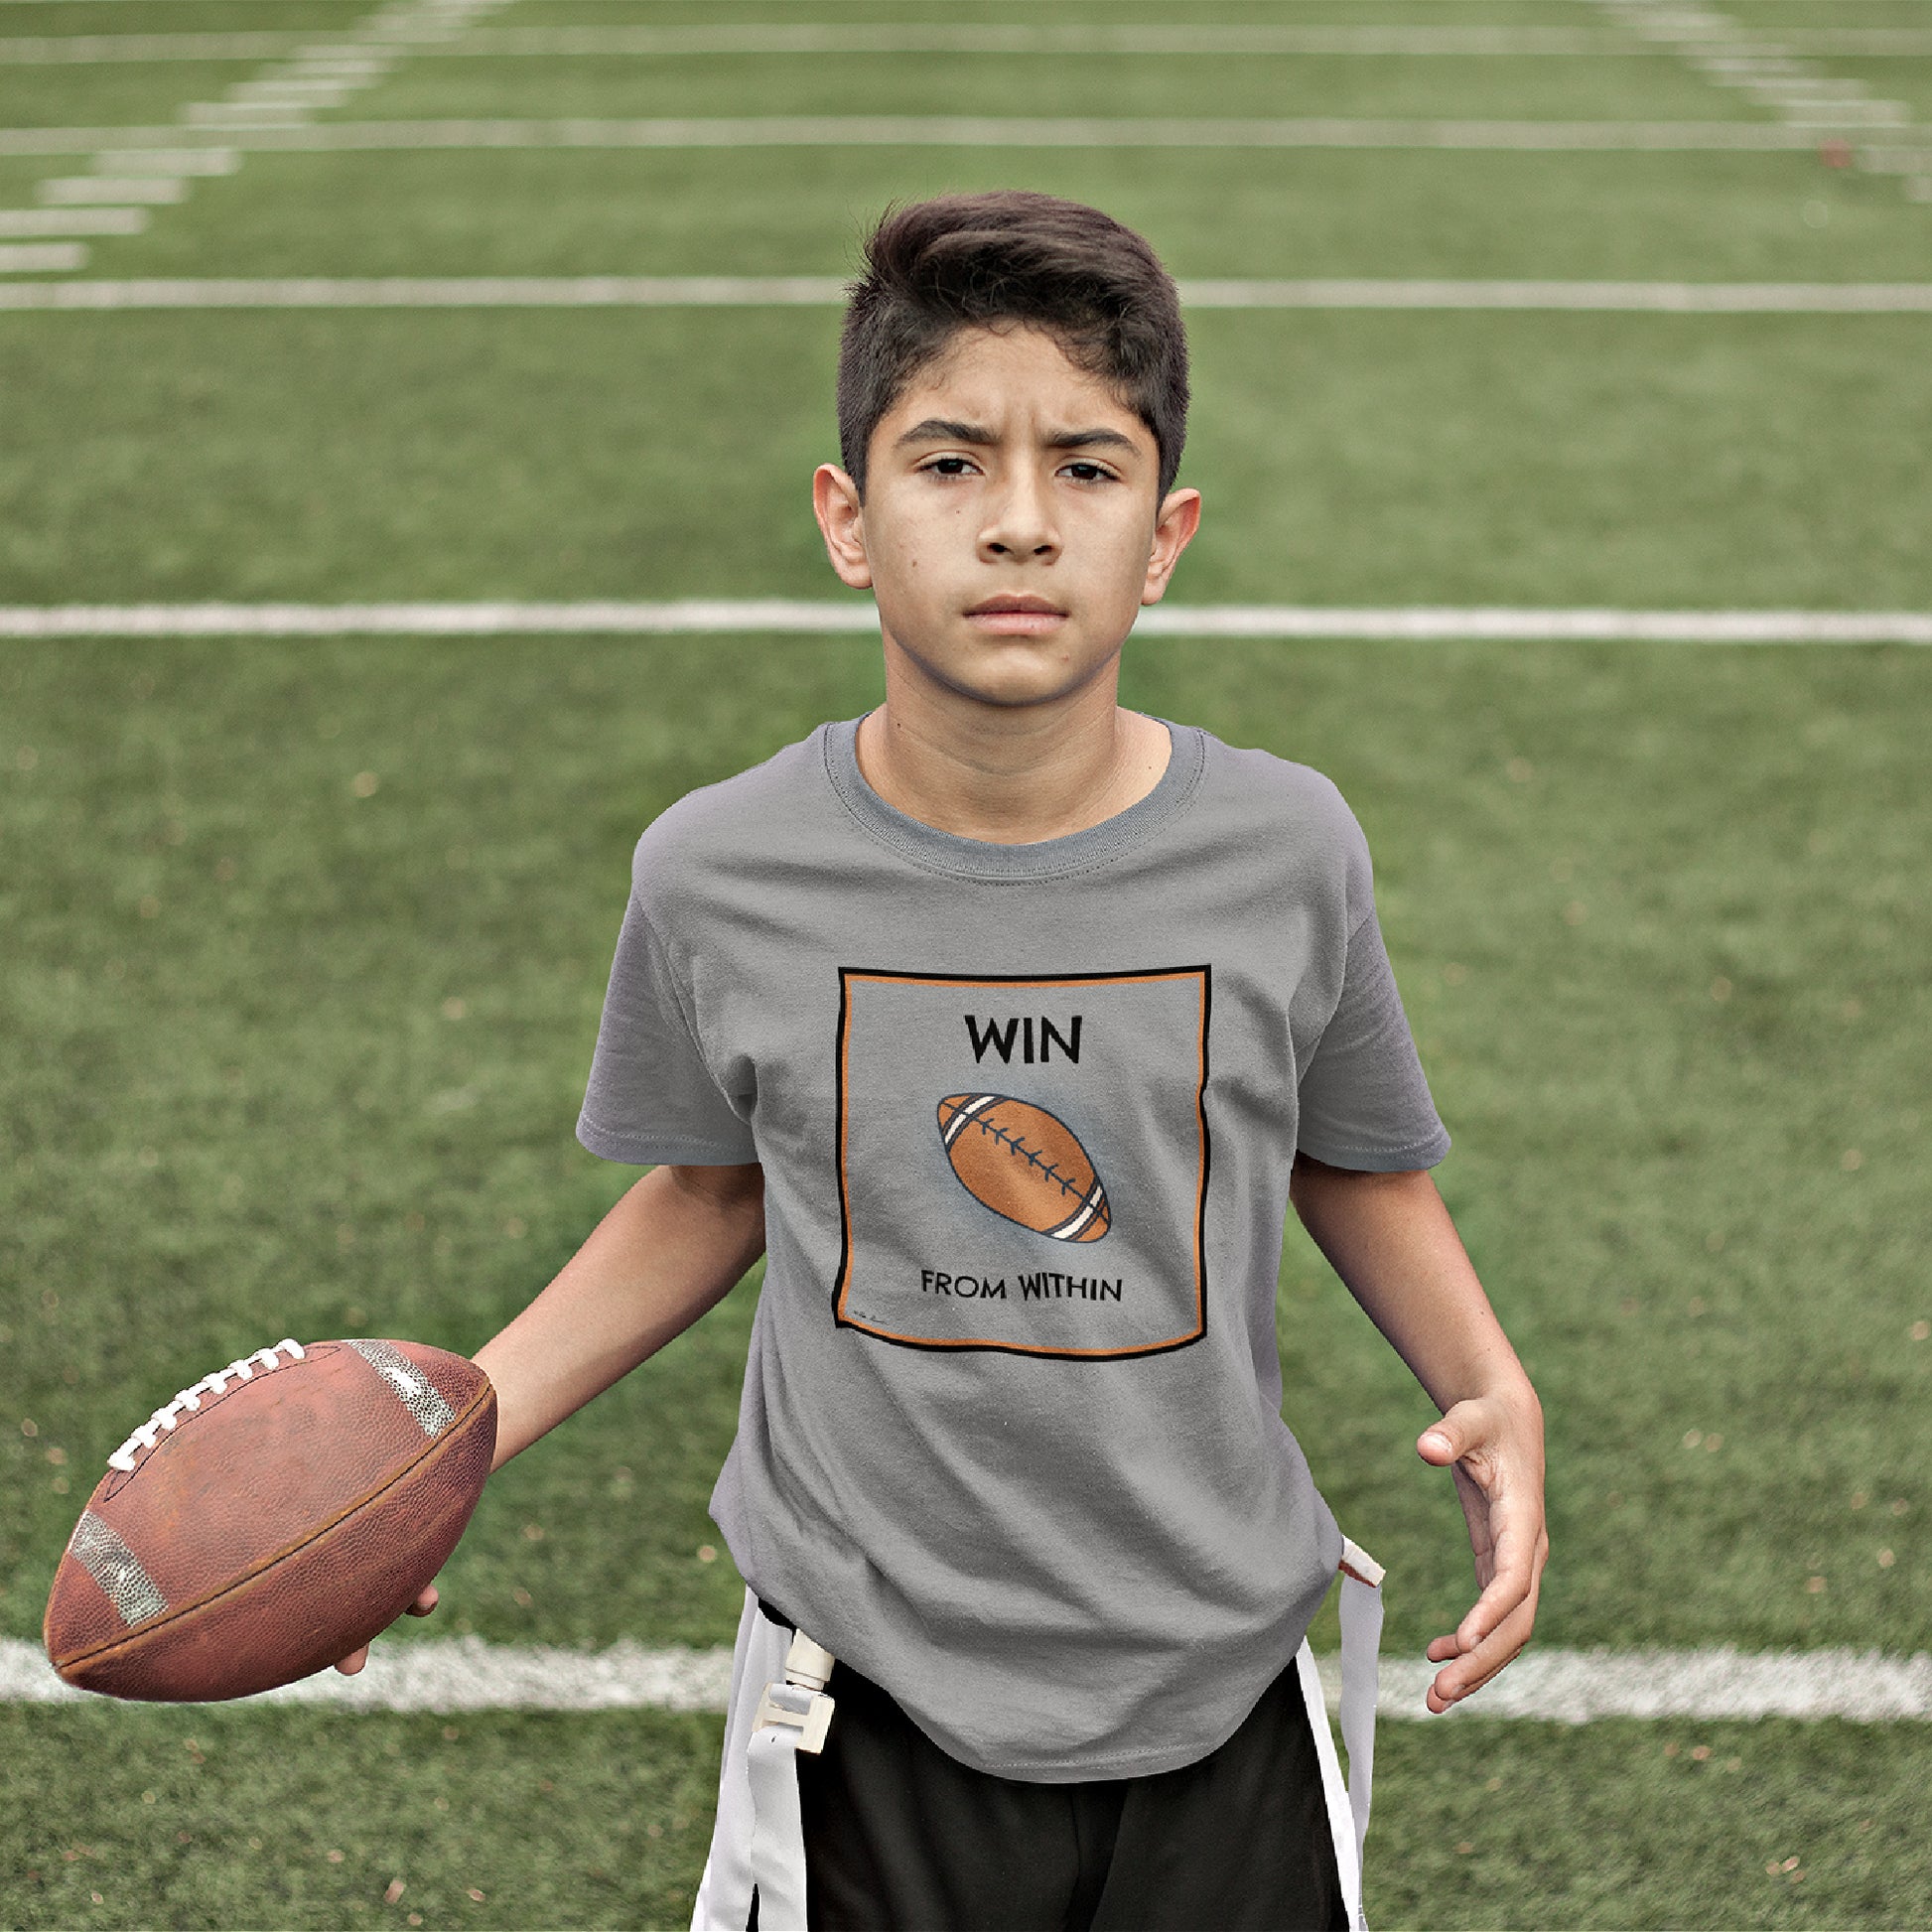 Mock up of a boy holding  a football while wearing our T-shirt